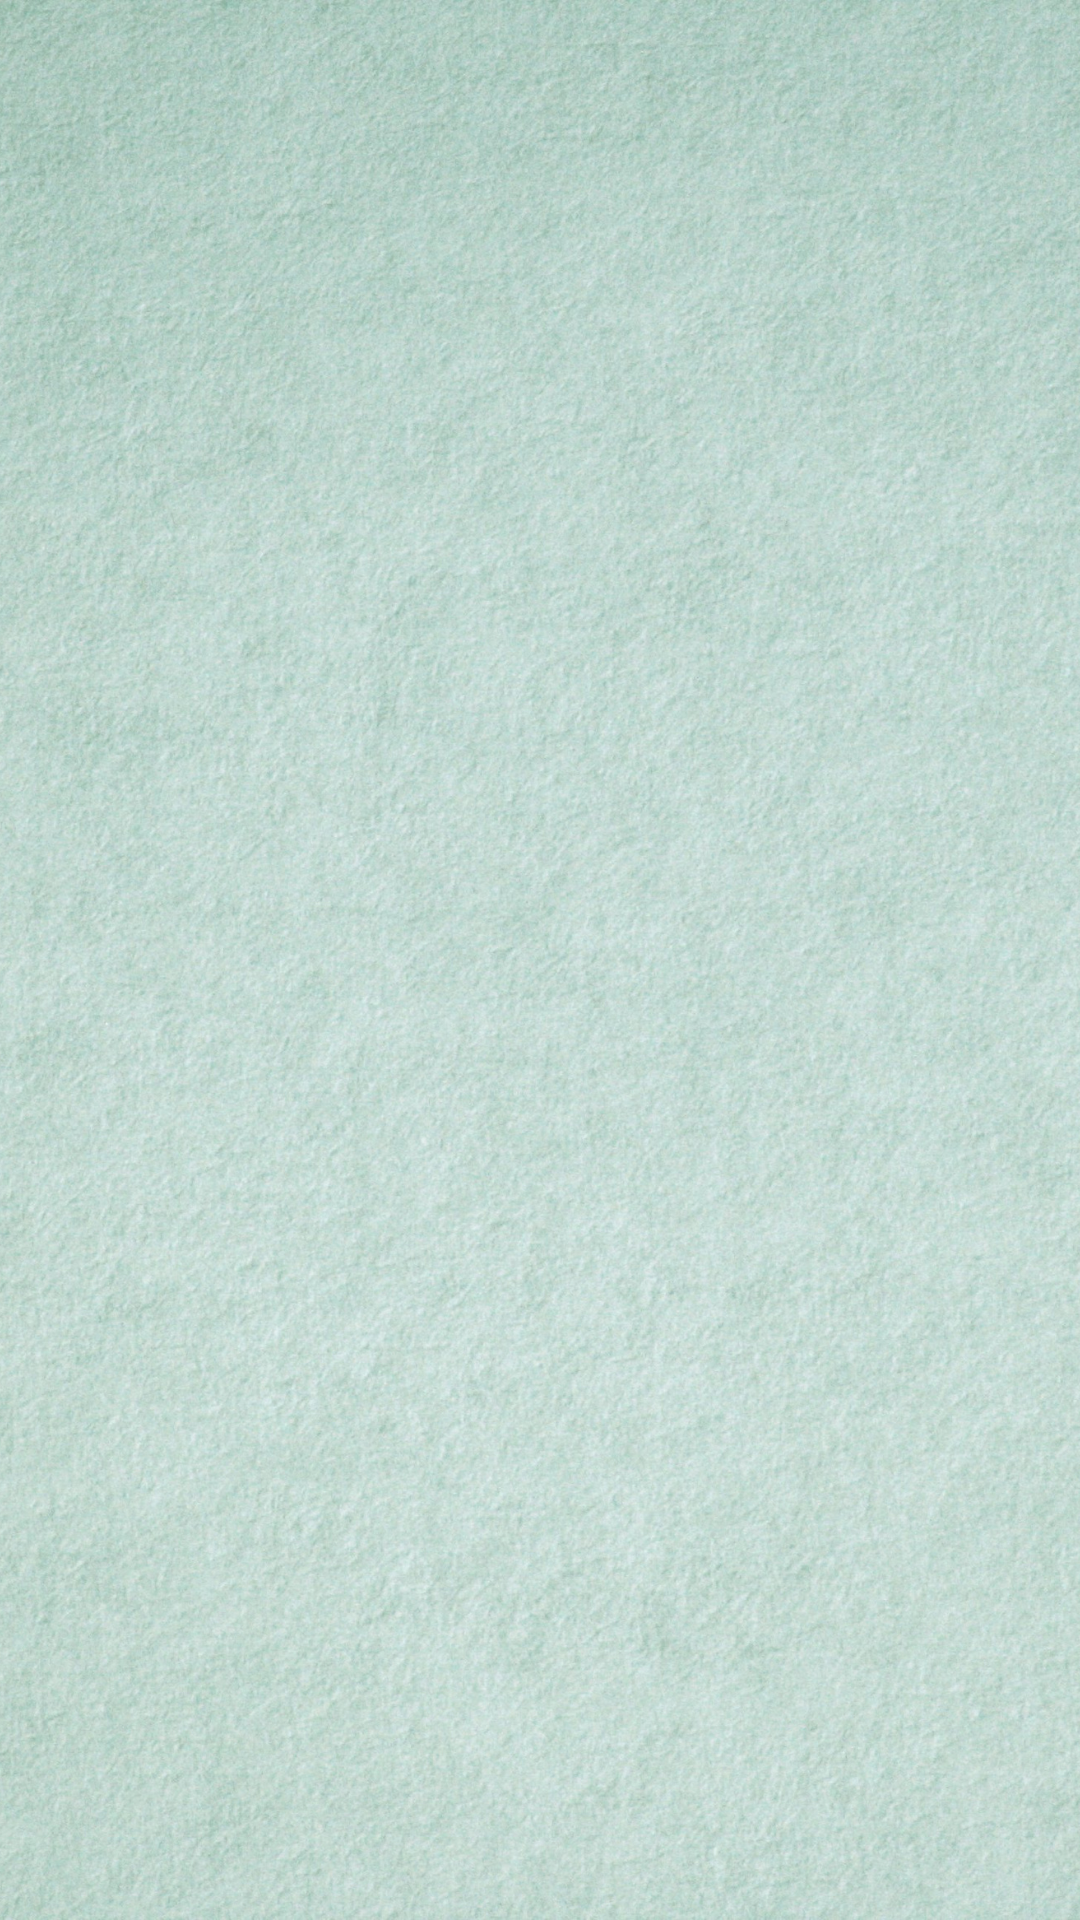 Free Sage Green Aesthetic Wallpaper for Your Phone. Just Jes Lyn